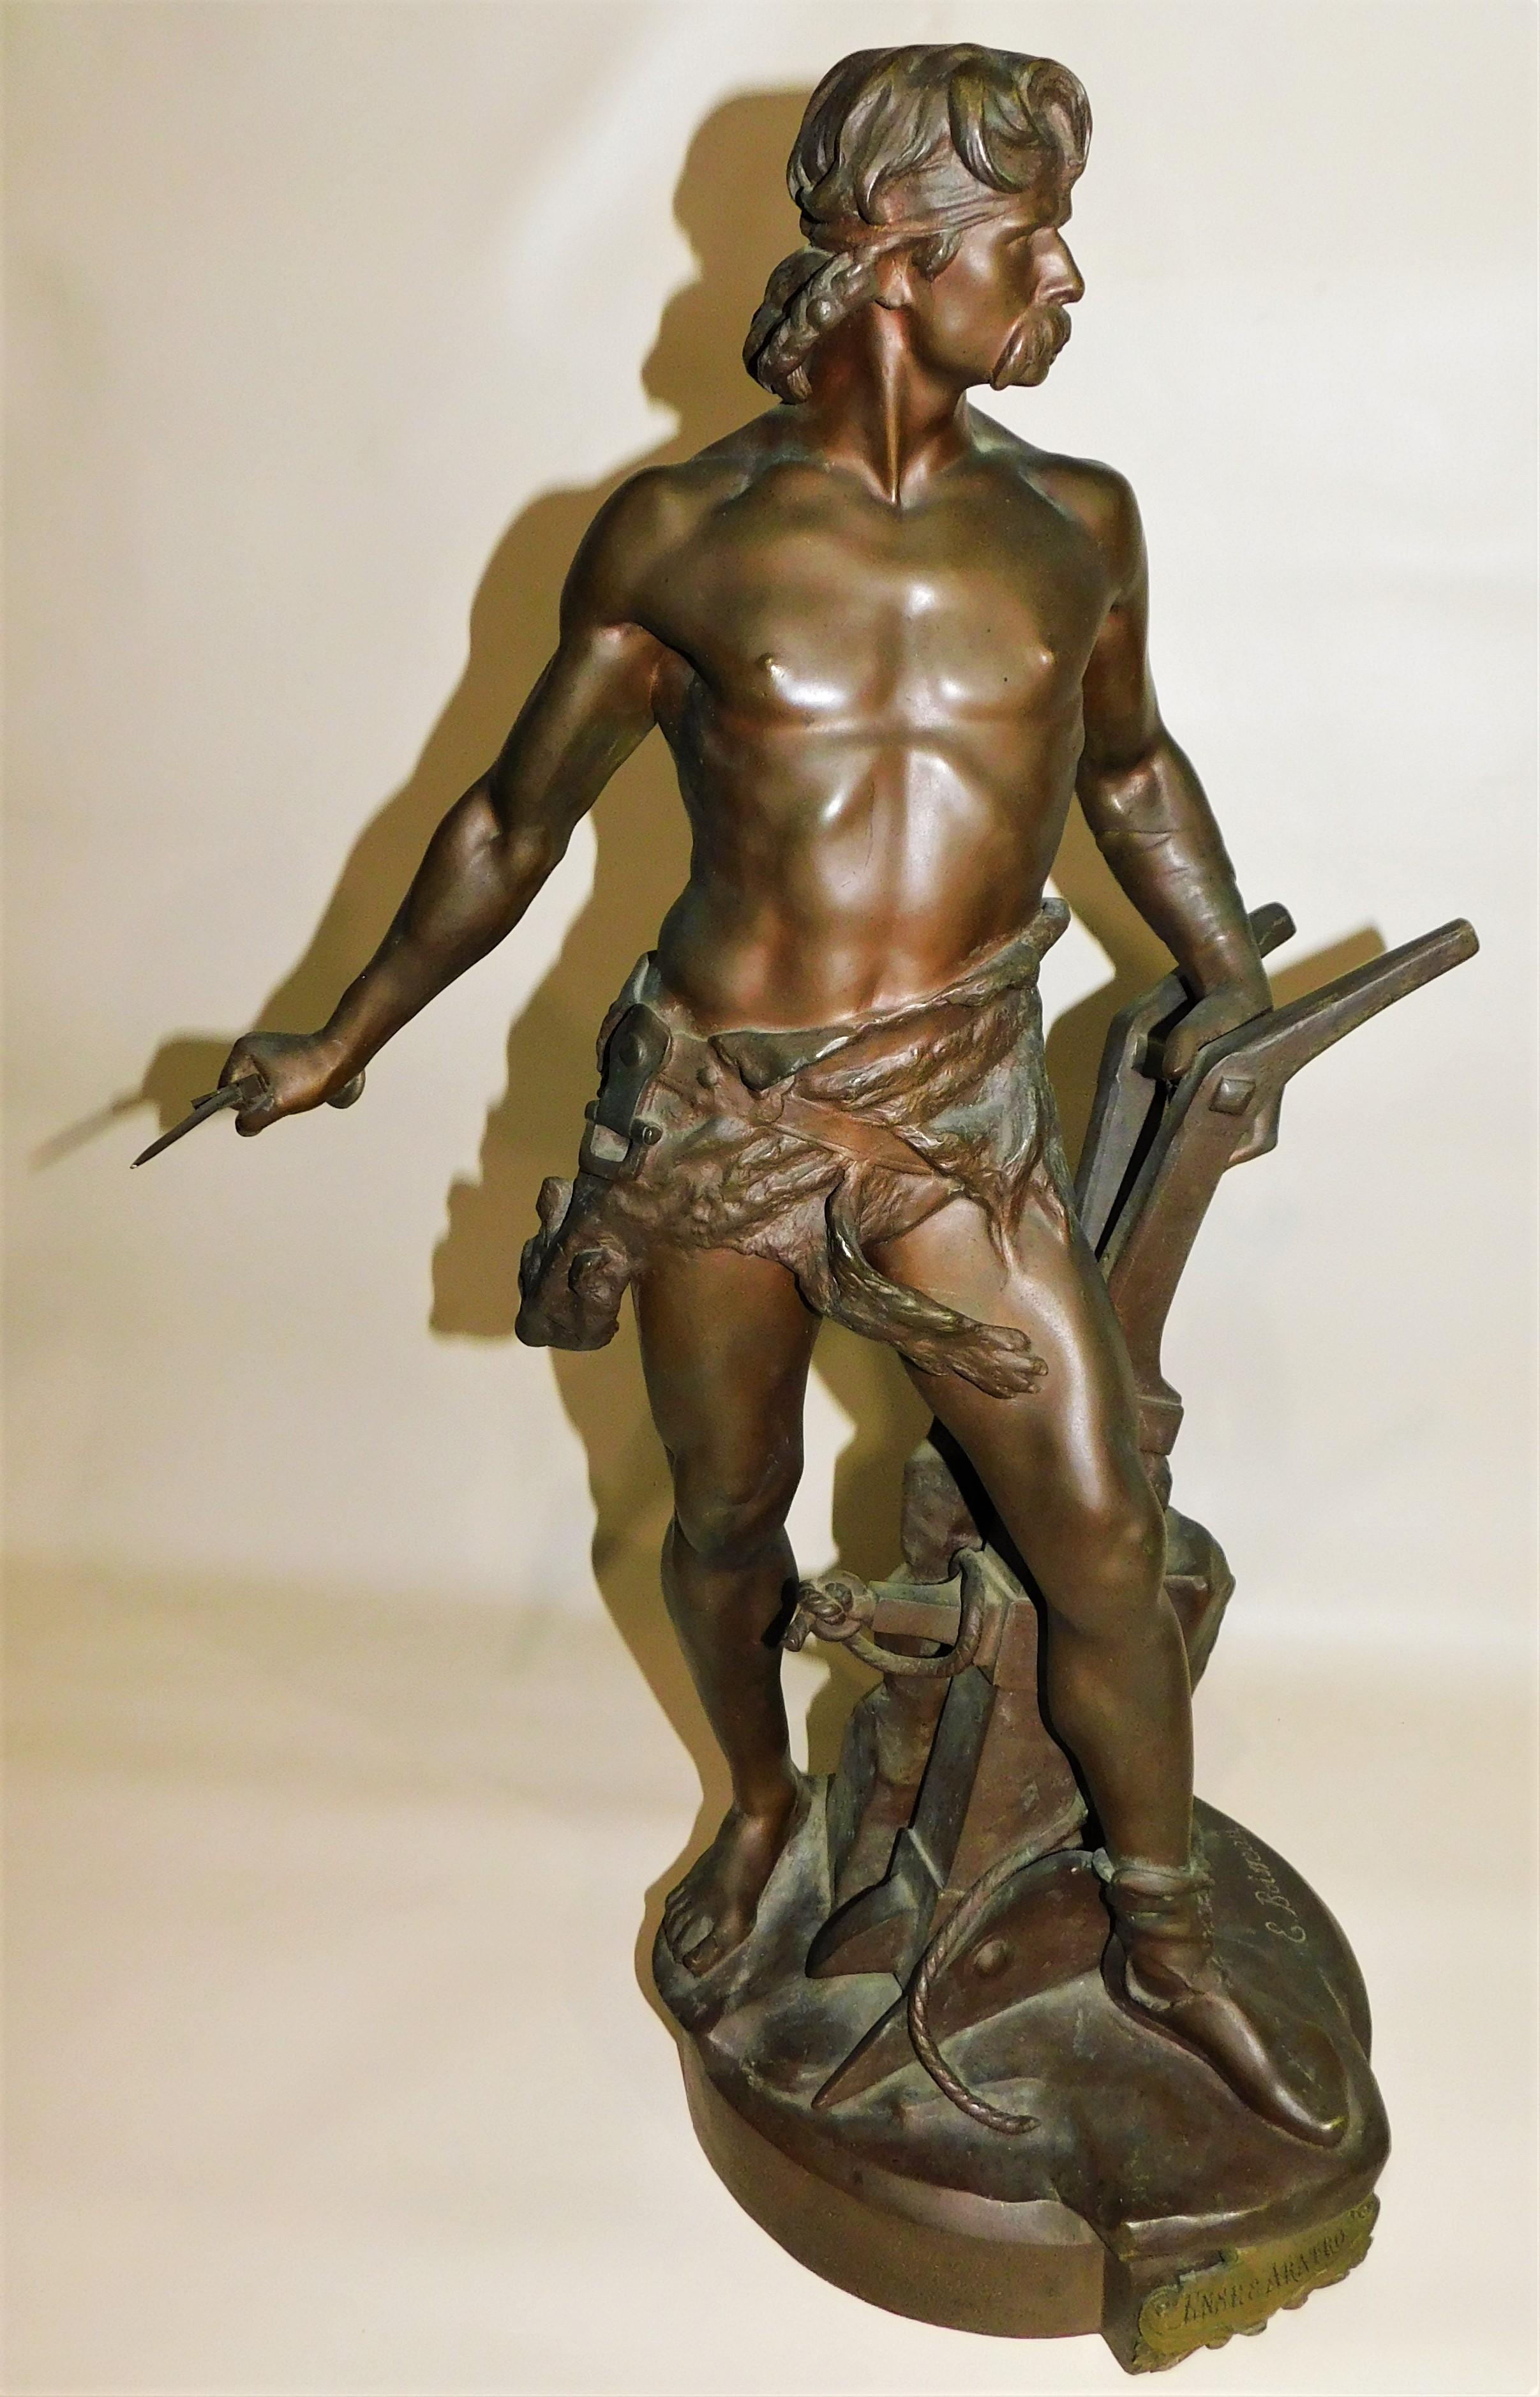 Emile-André Boisseau (1842-1923), bronze figural sculpture of male (warrior) figure wearing a fur loin cloth with a sword/knife in one hand beside a farmers plow. Main title, 